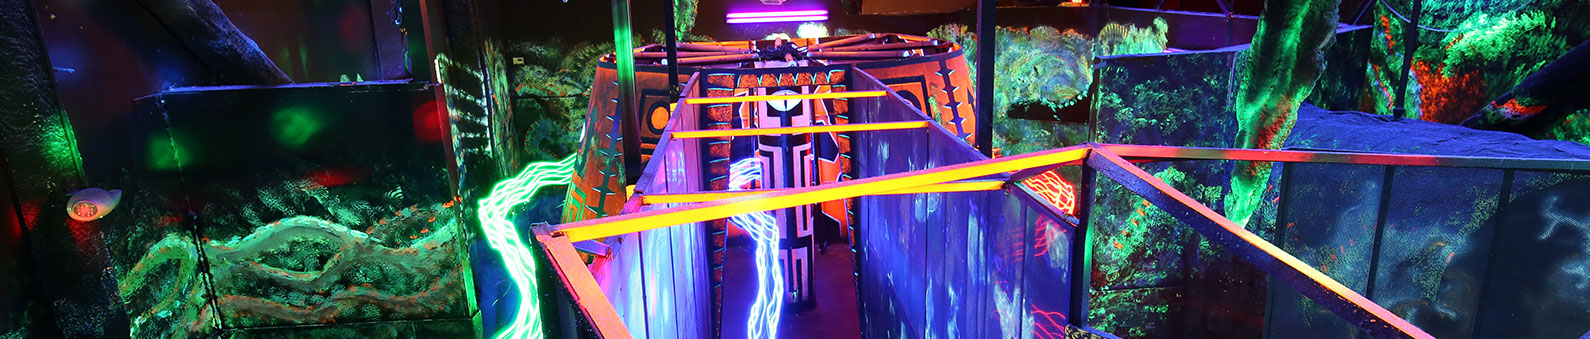 ULTRAZONE LOS ANGELES LARGEST LASER TAG FACILITY